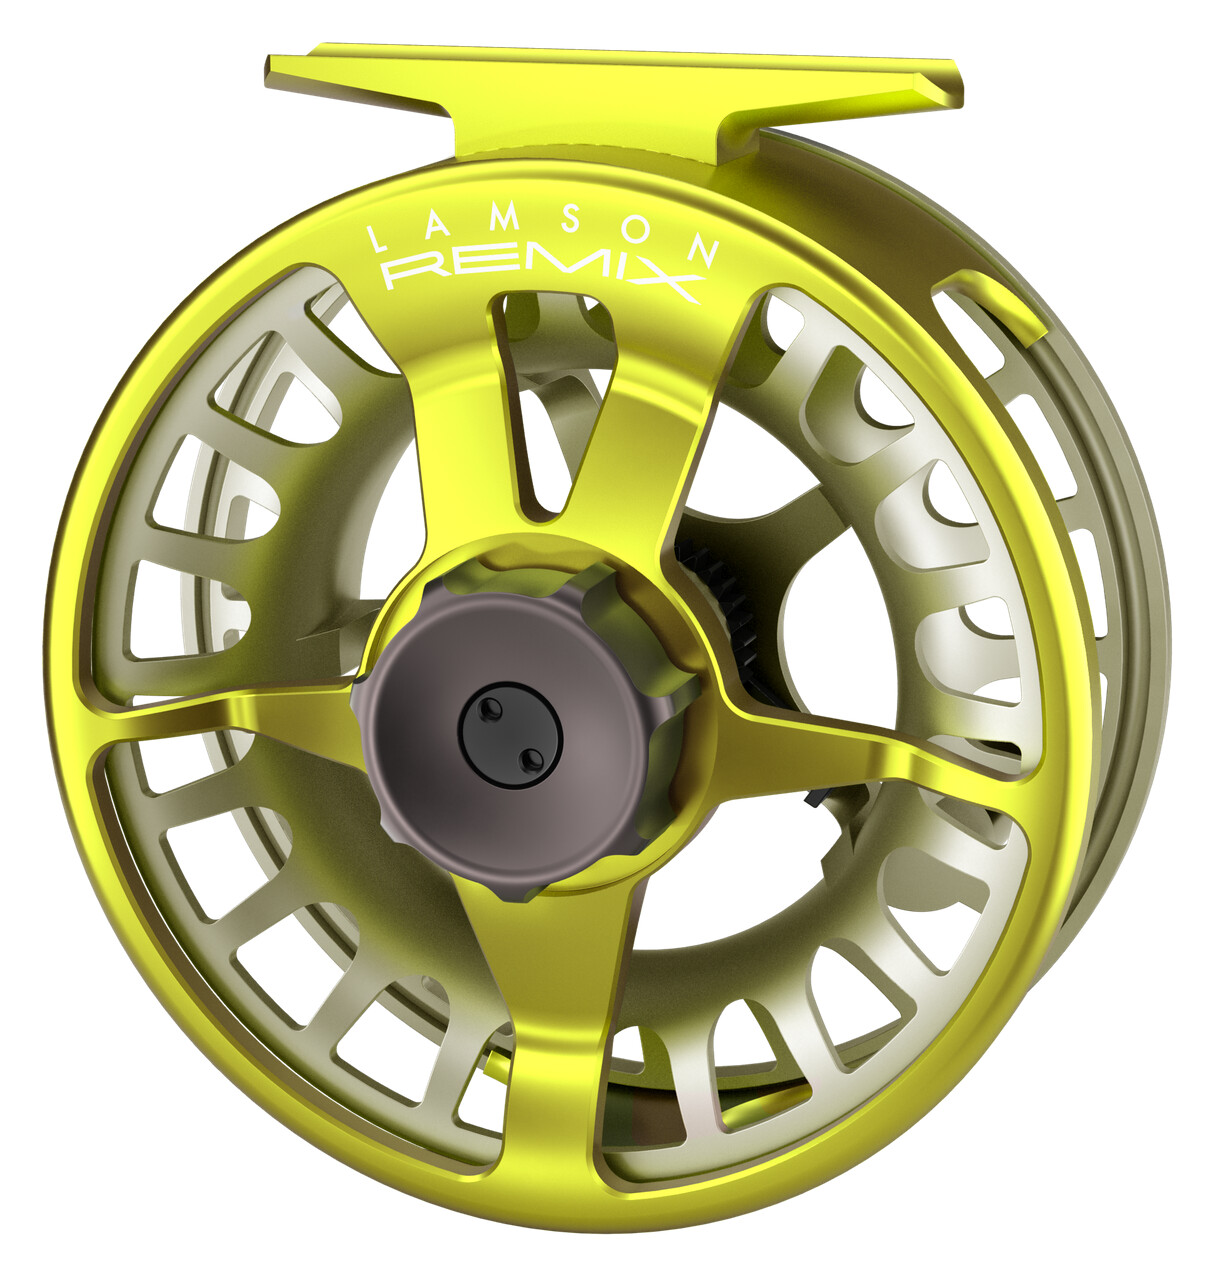 Fly Reel Waterworks Lamson Remix 3-Pack Sublime